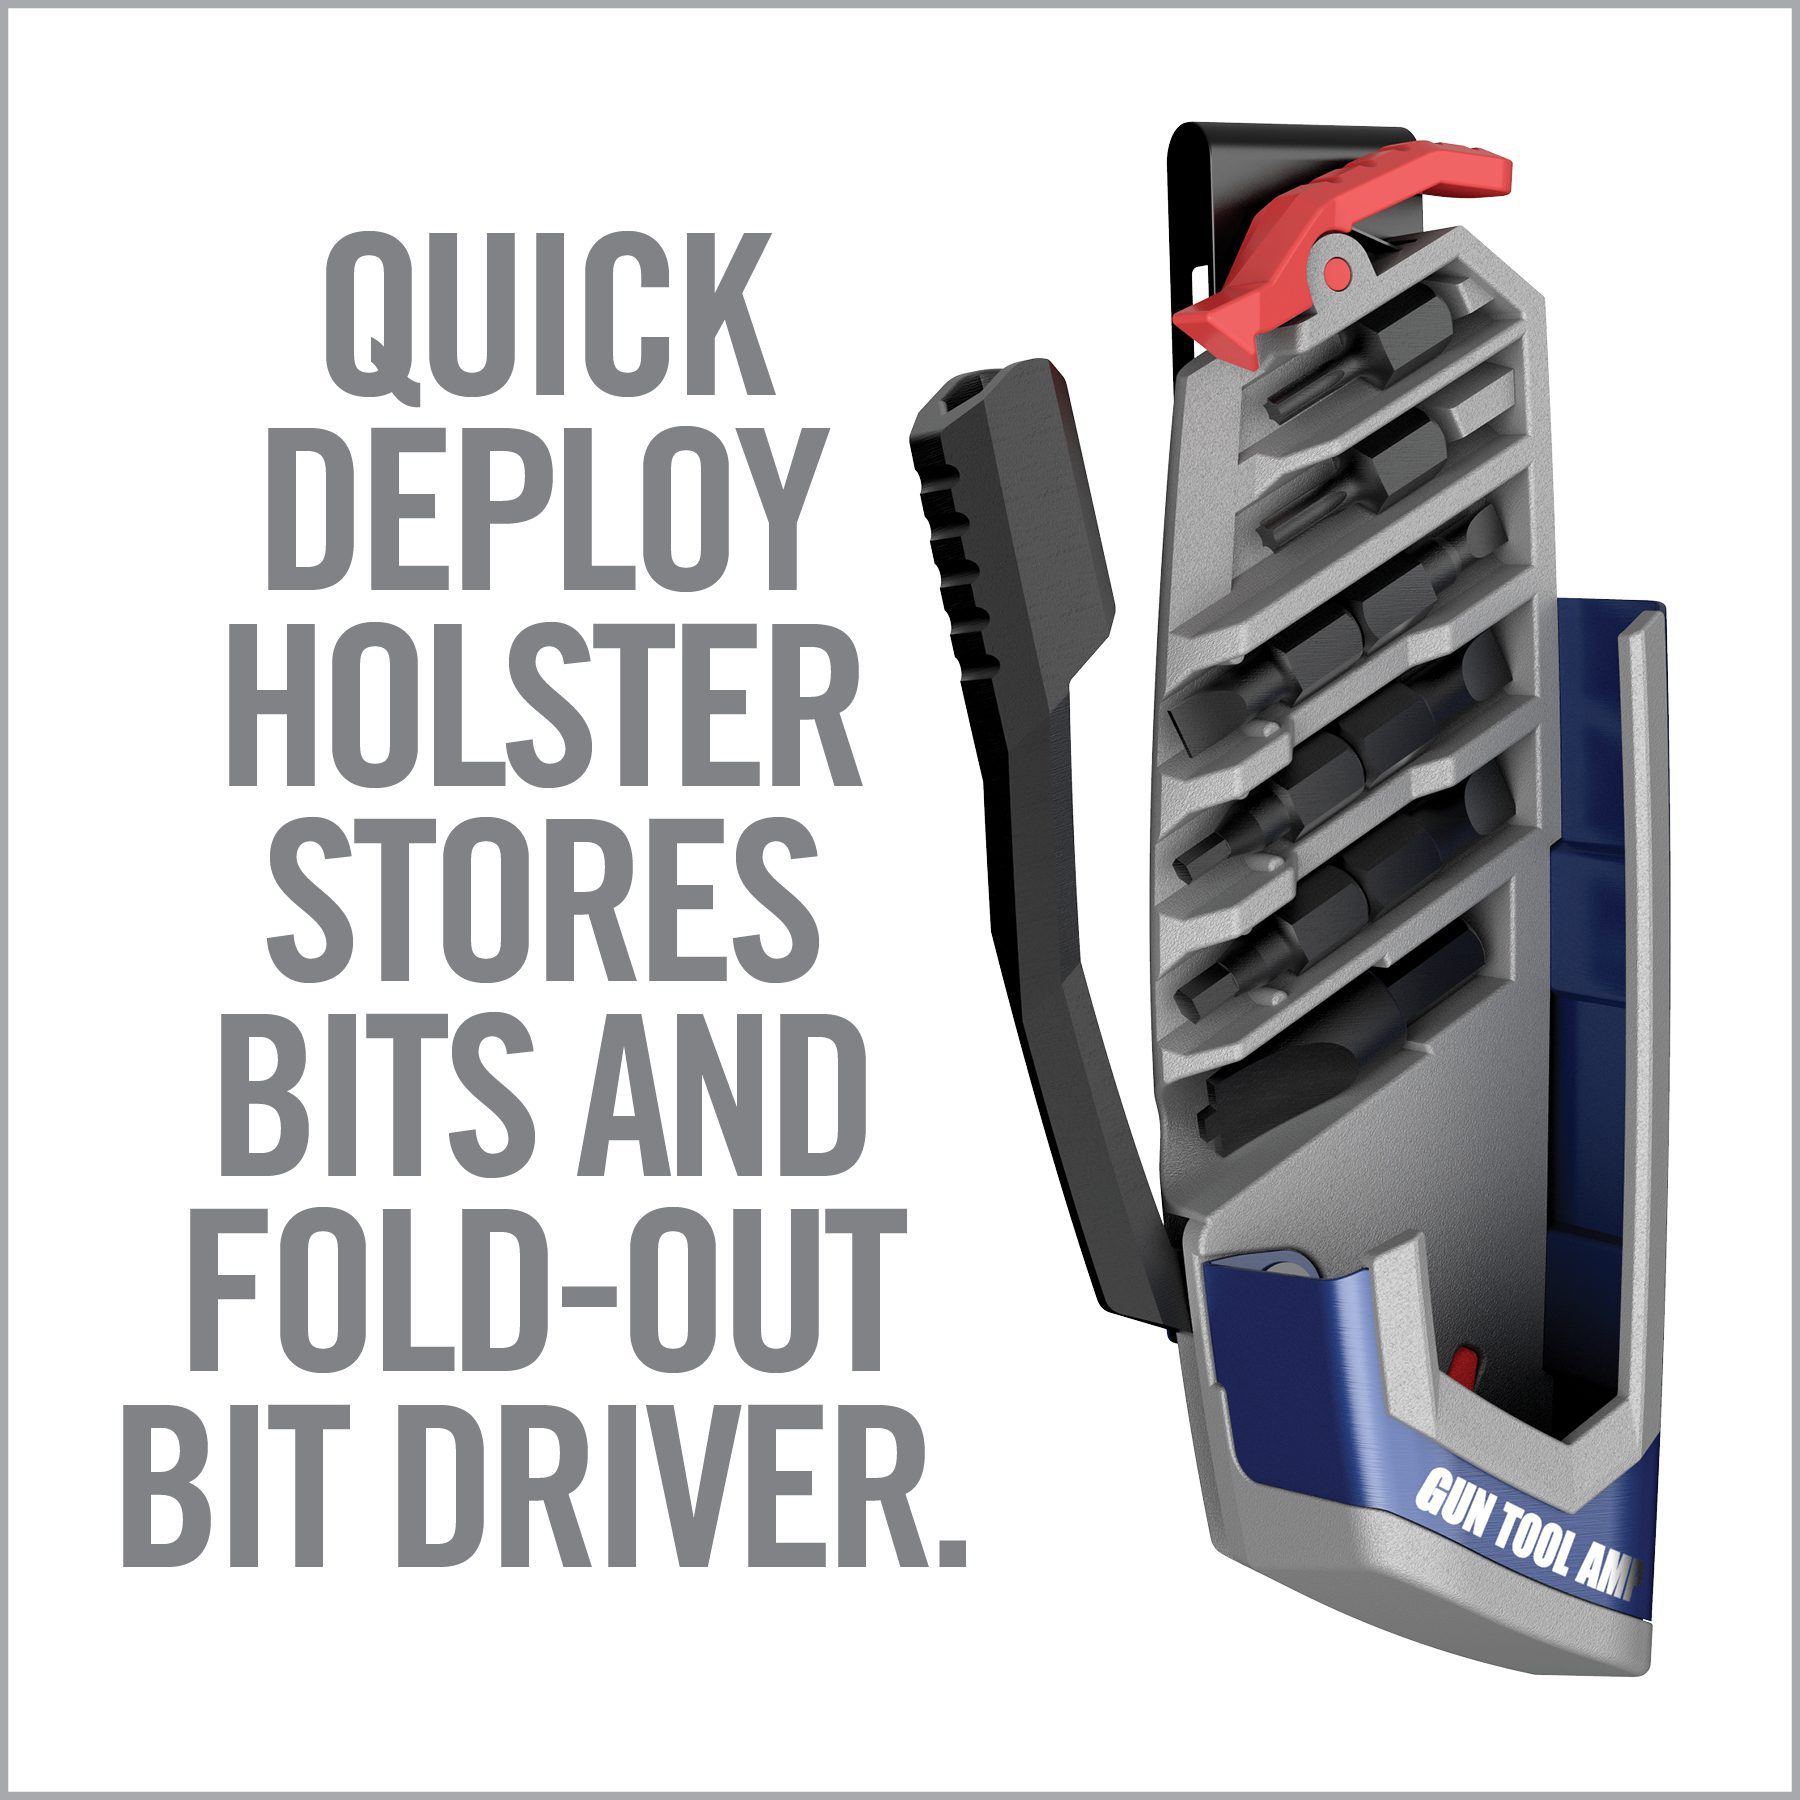 an advertisement for a tool store with the words quick deploy holster stores bits and fold - out